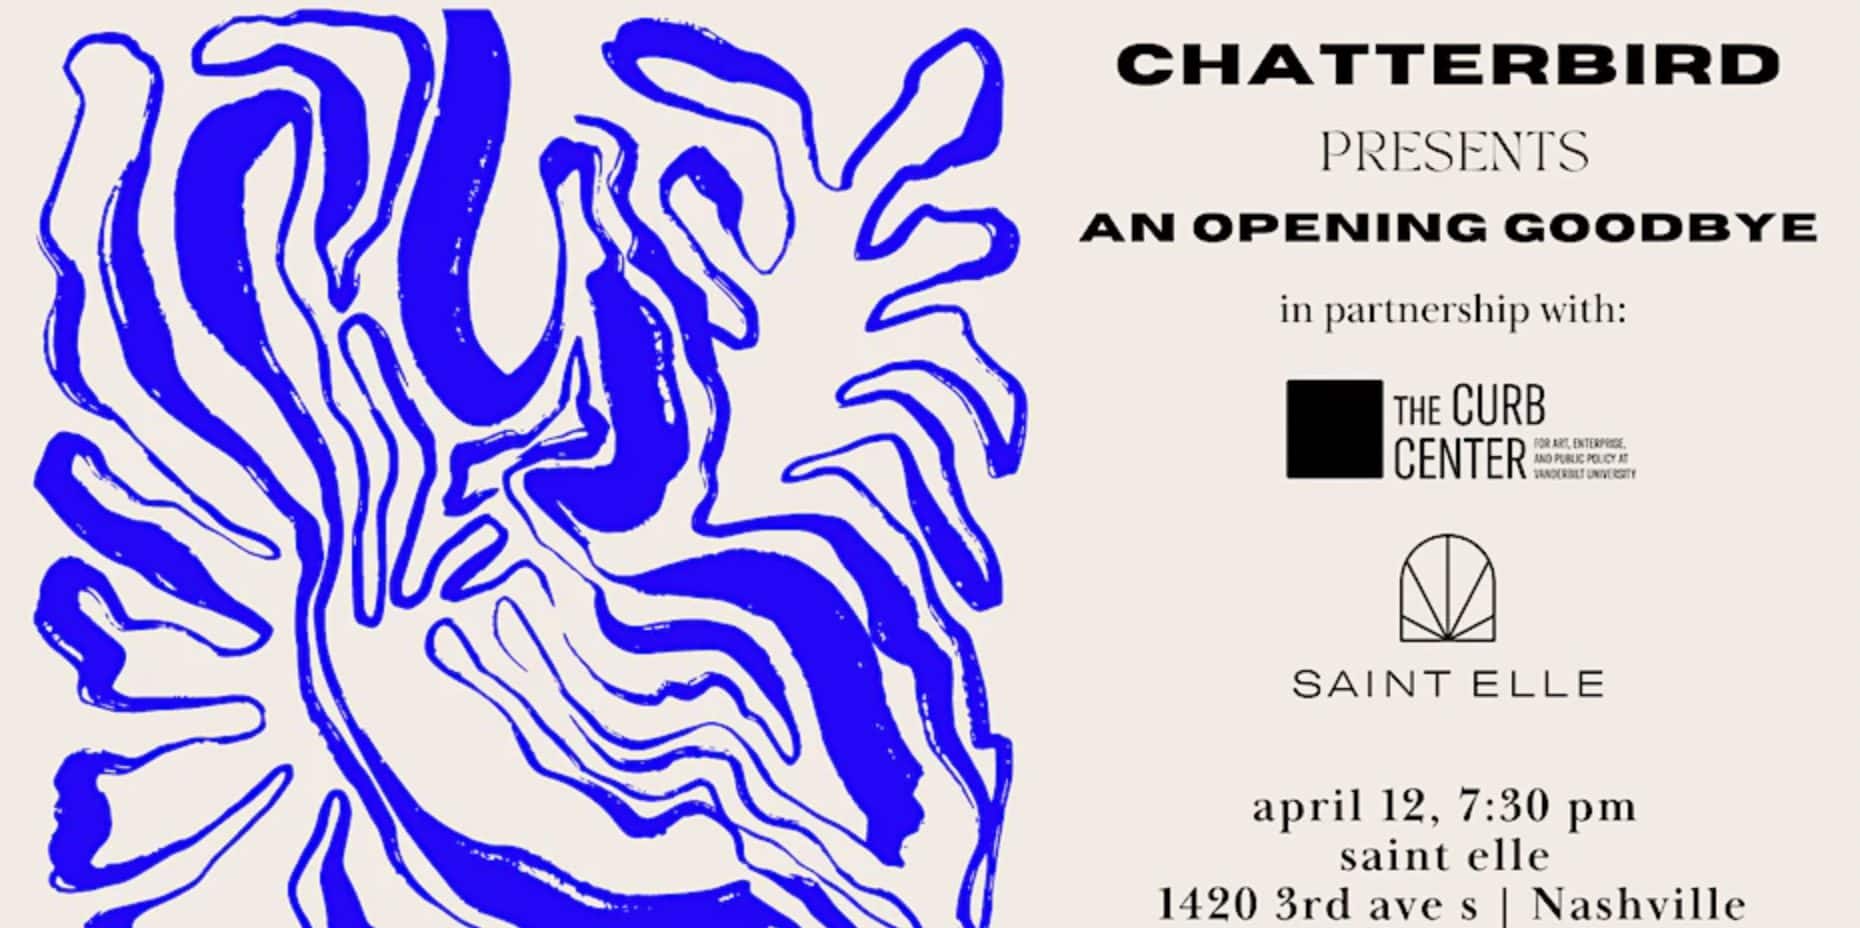 chatterbird presents AN OPENING GOODBYE-Event Nashville.